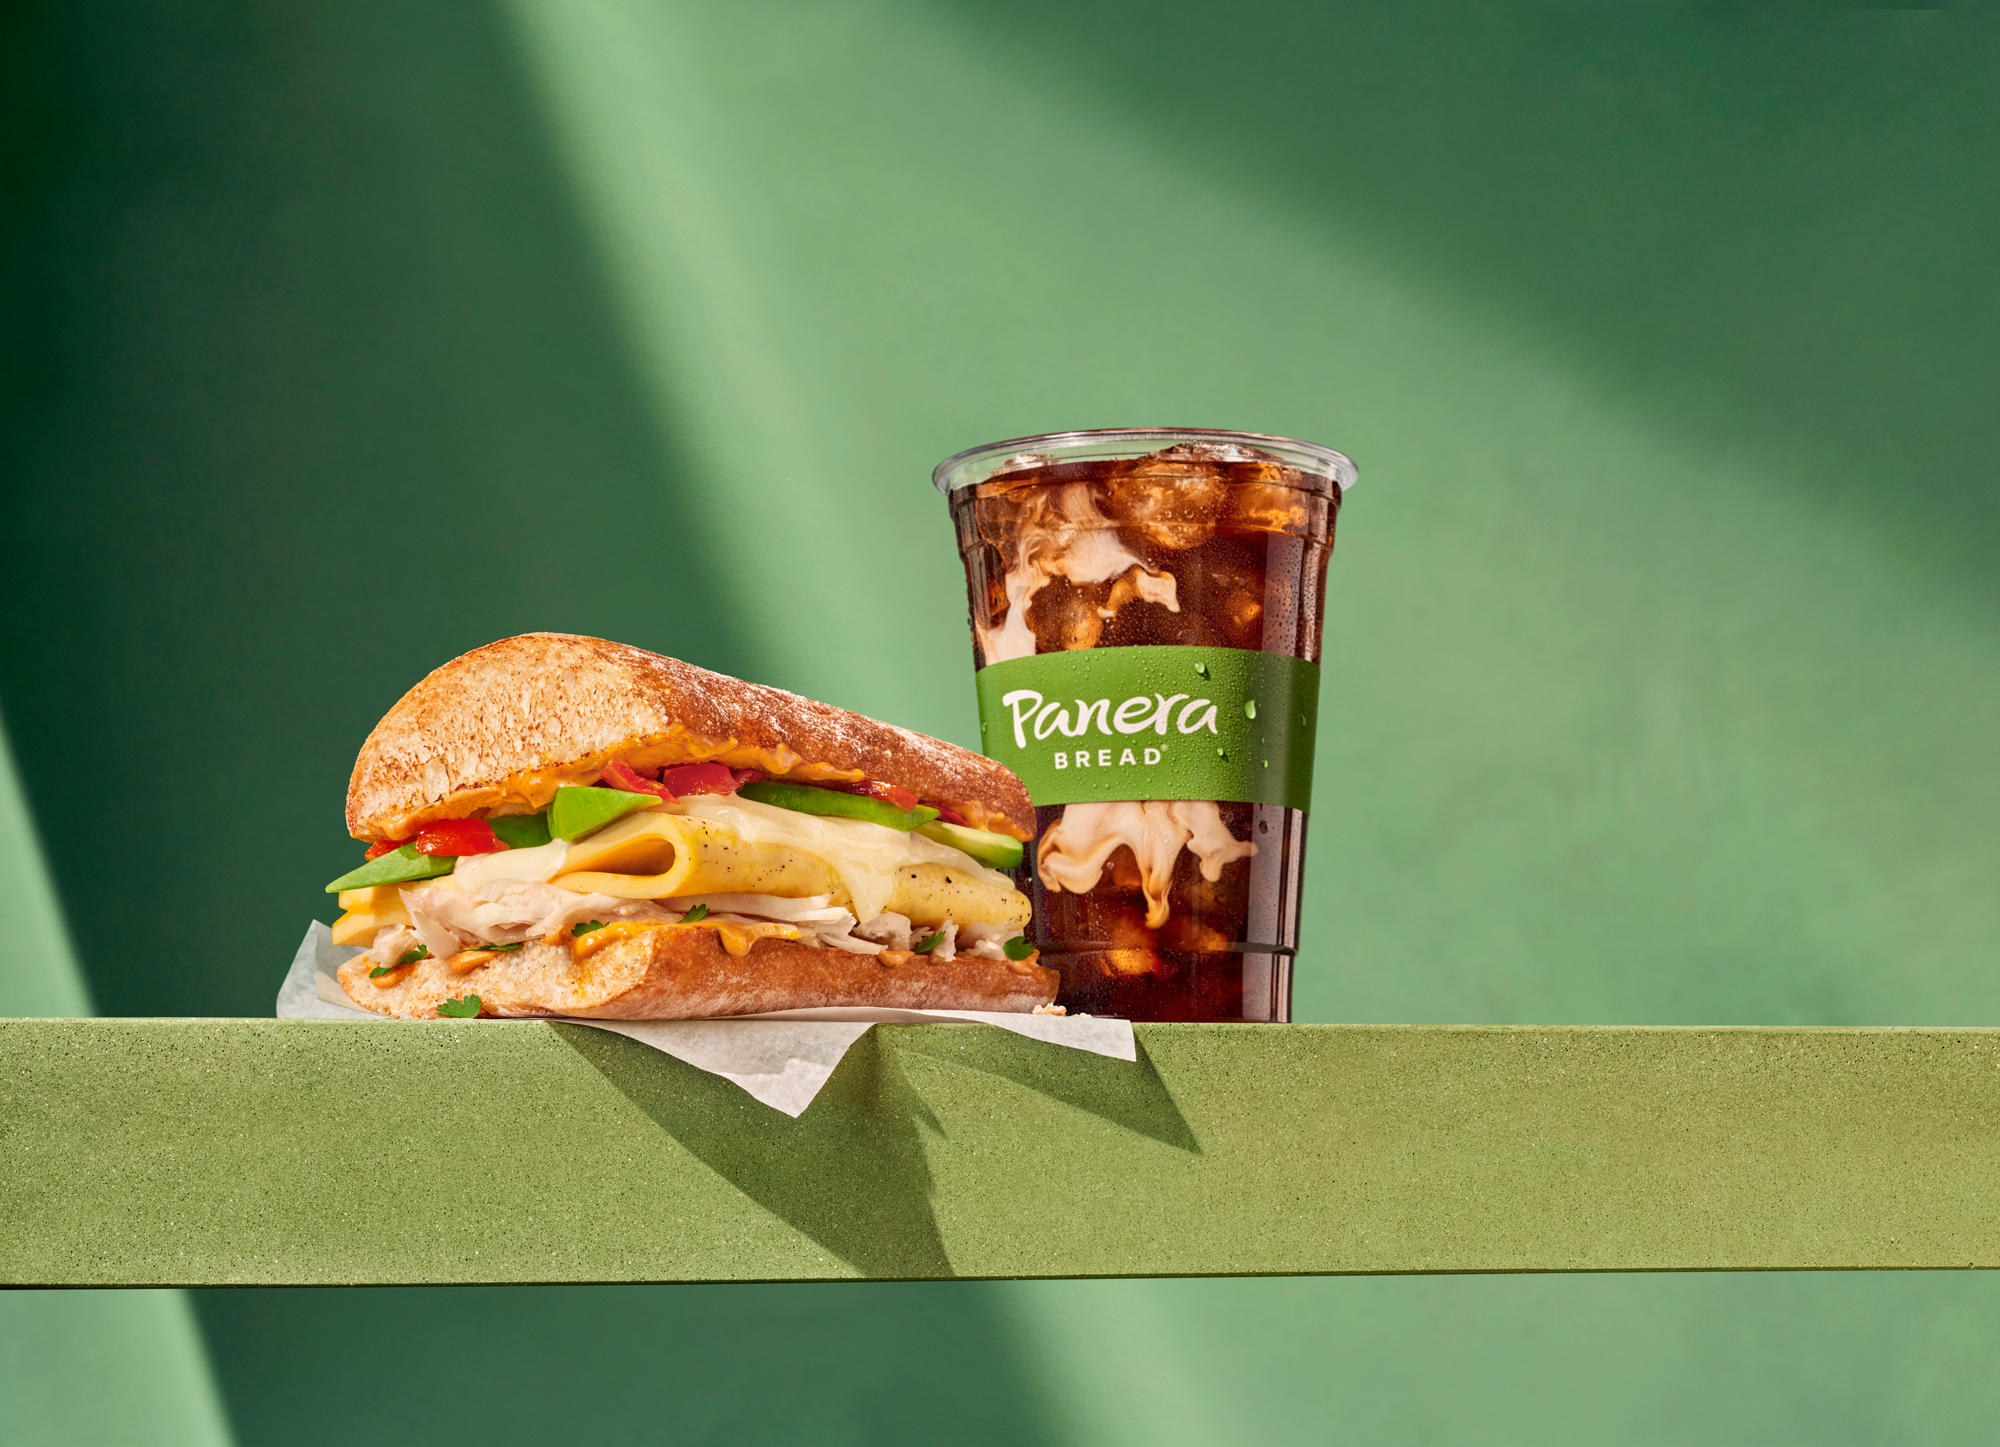 Chipotle Chicken, Egg & Avo and Iced Cafe Blend Dark Coffee Panera Bread Tracy (209)855-8014